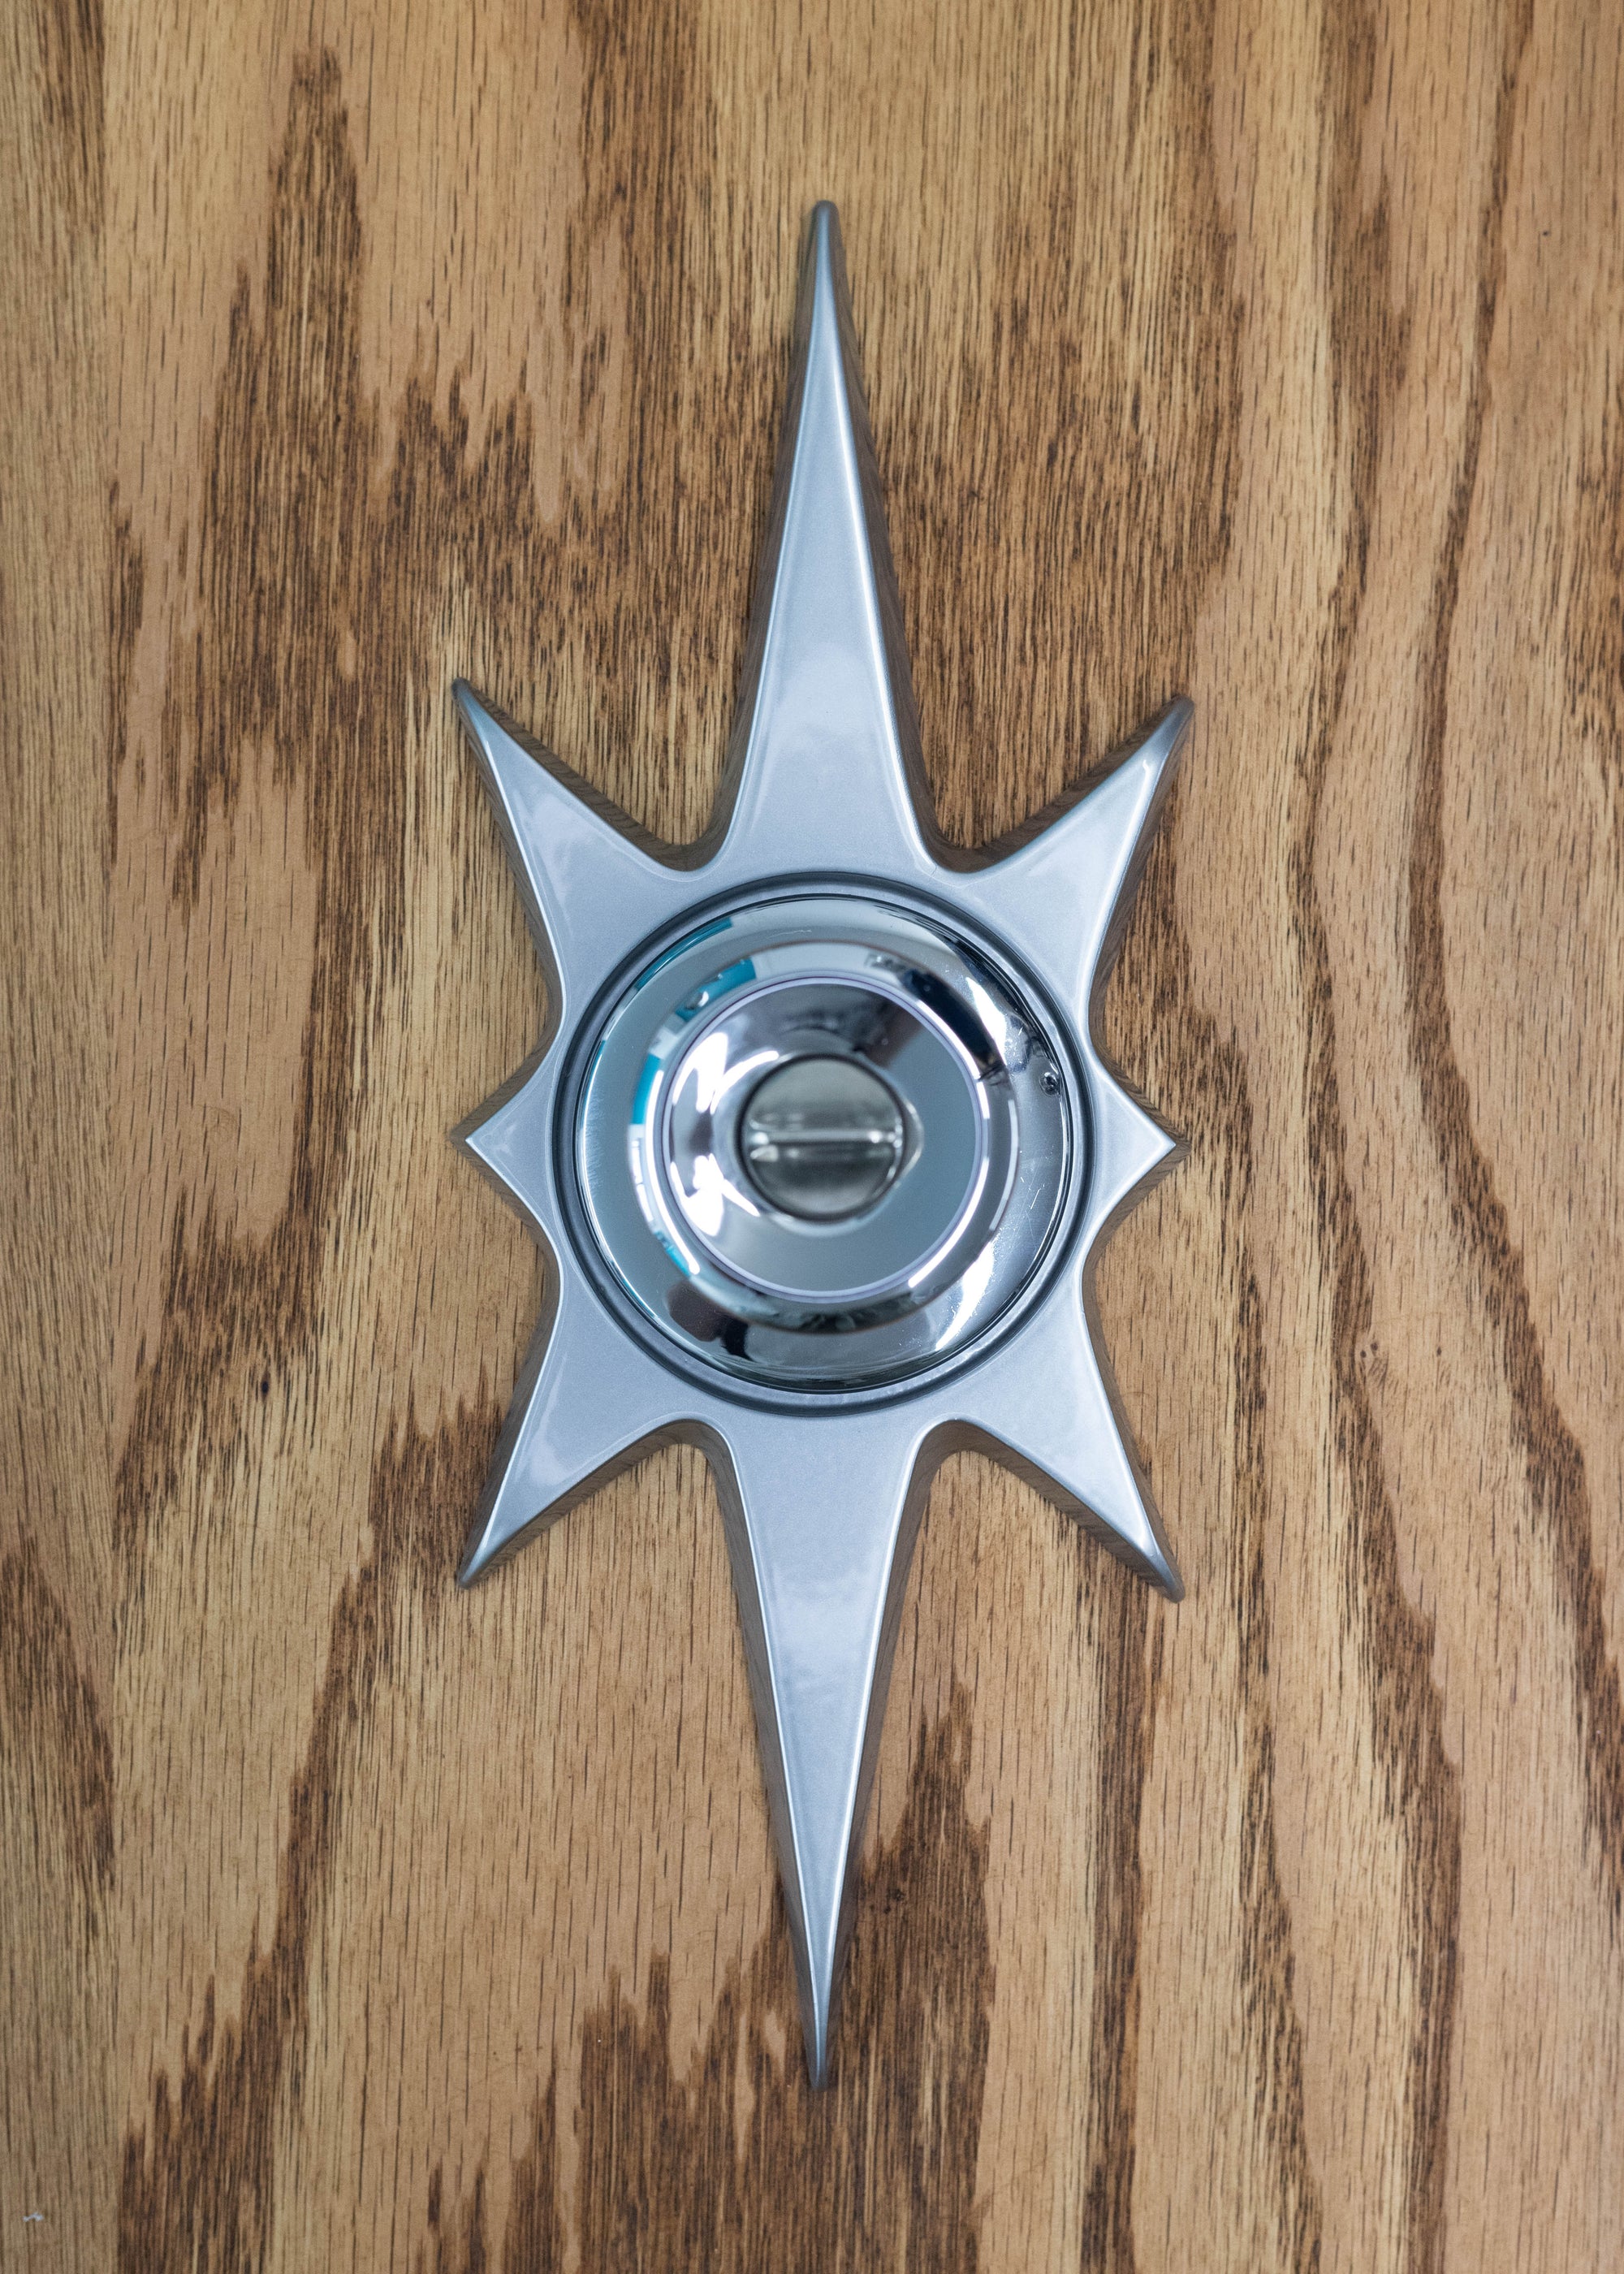 A silver starburst doorknob escutcheon paired with a silver door knob (knob not for sale). It is silver powder coated which gives it a very glossy and smooth finish.The starburst consists of two long points on top and bottom, 2 very short points horizontal, and 4 medium points diagonal.